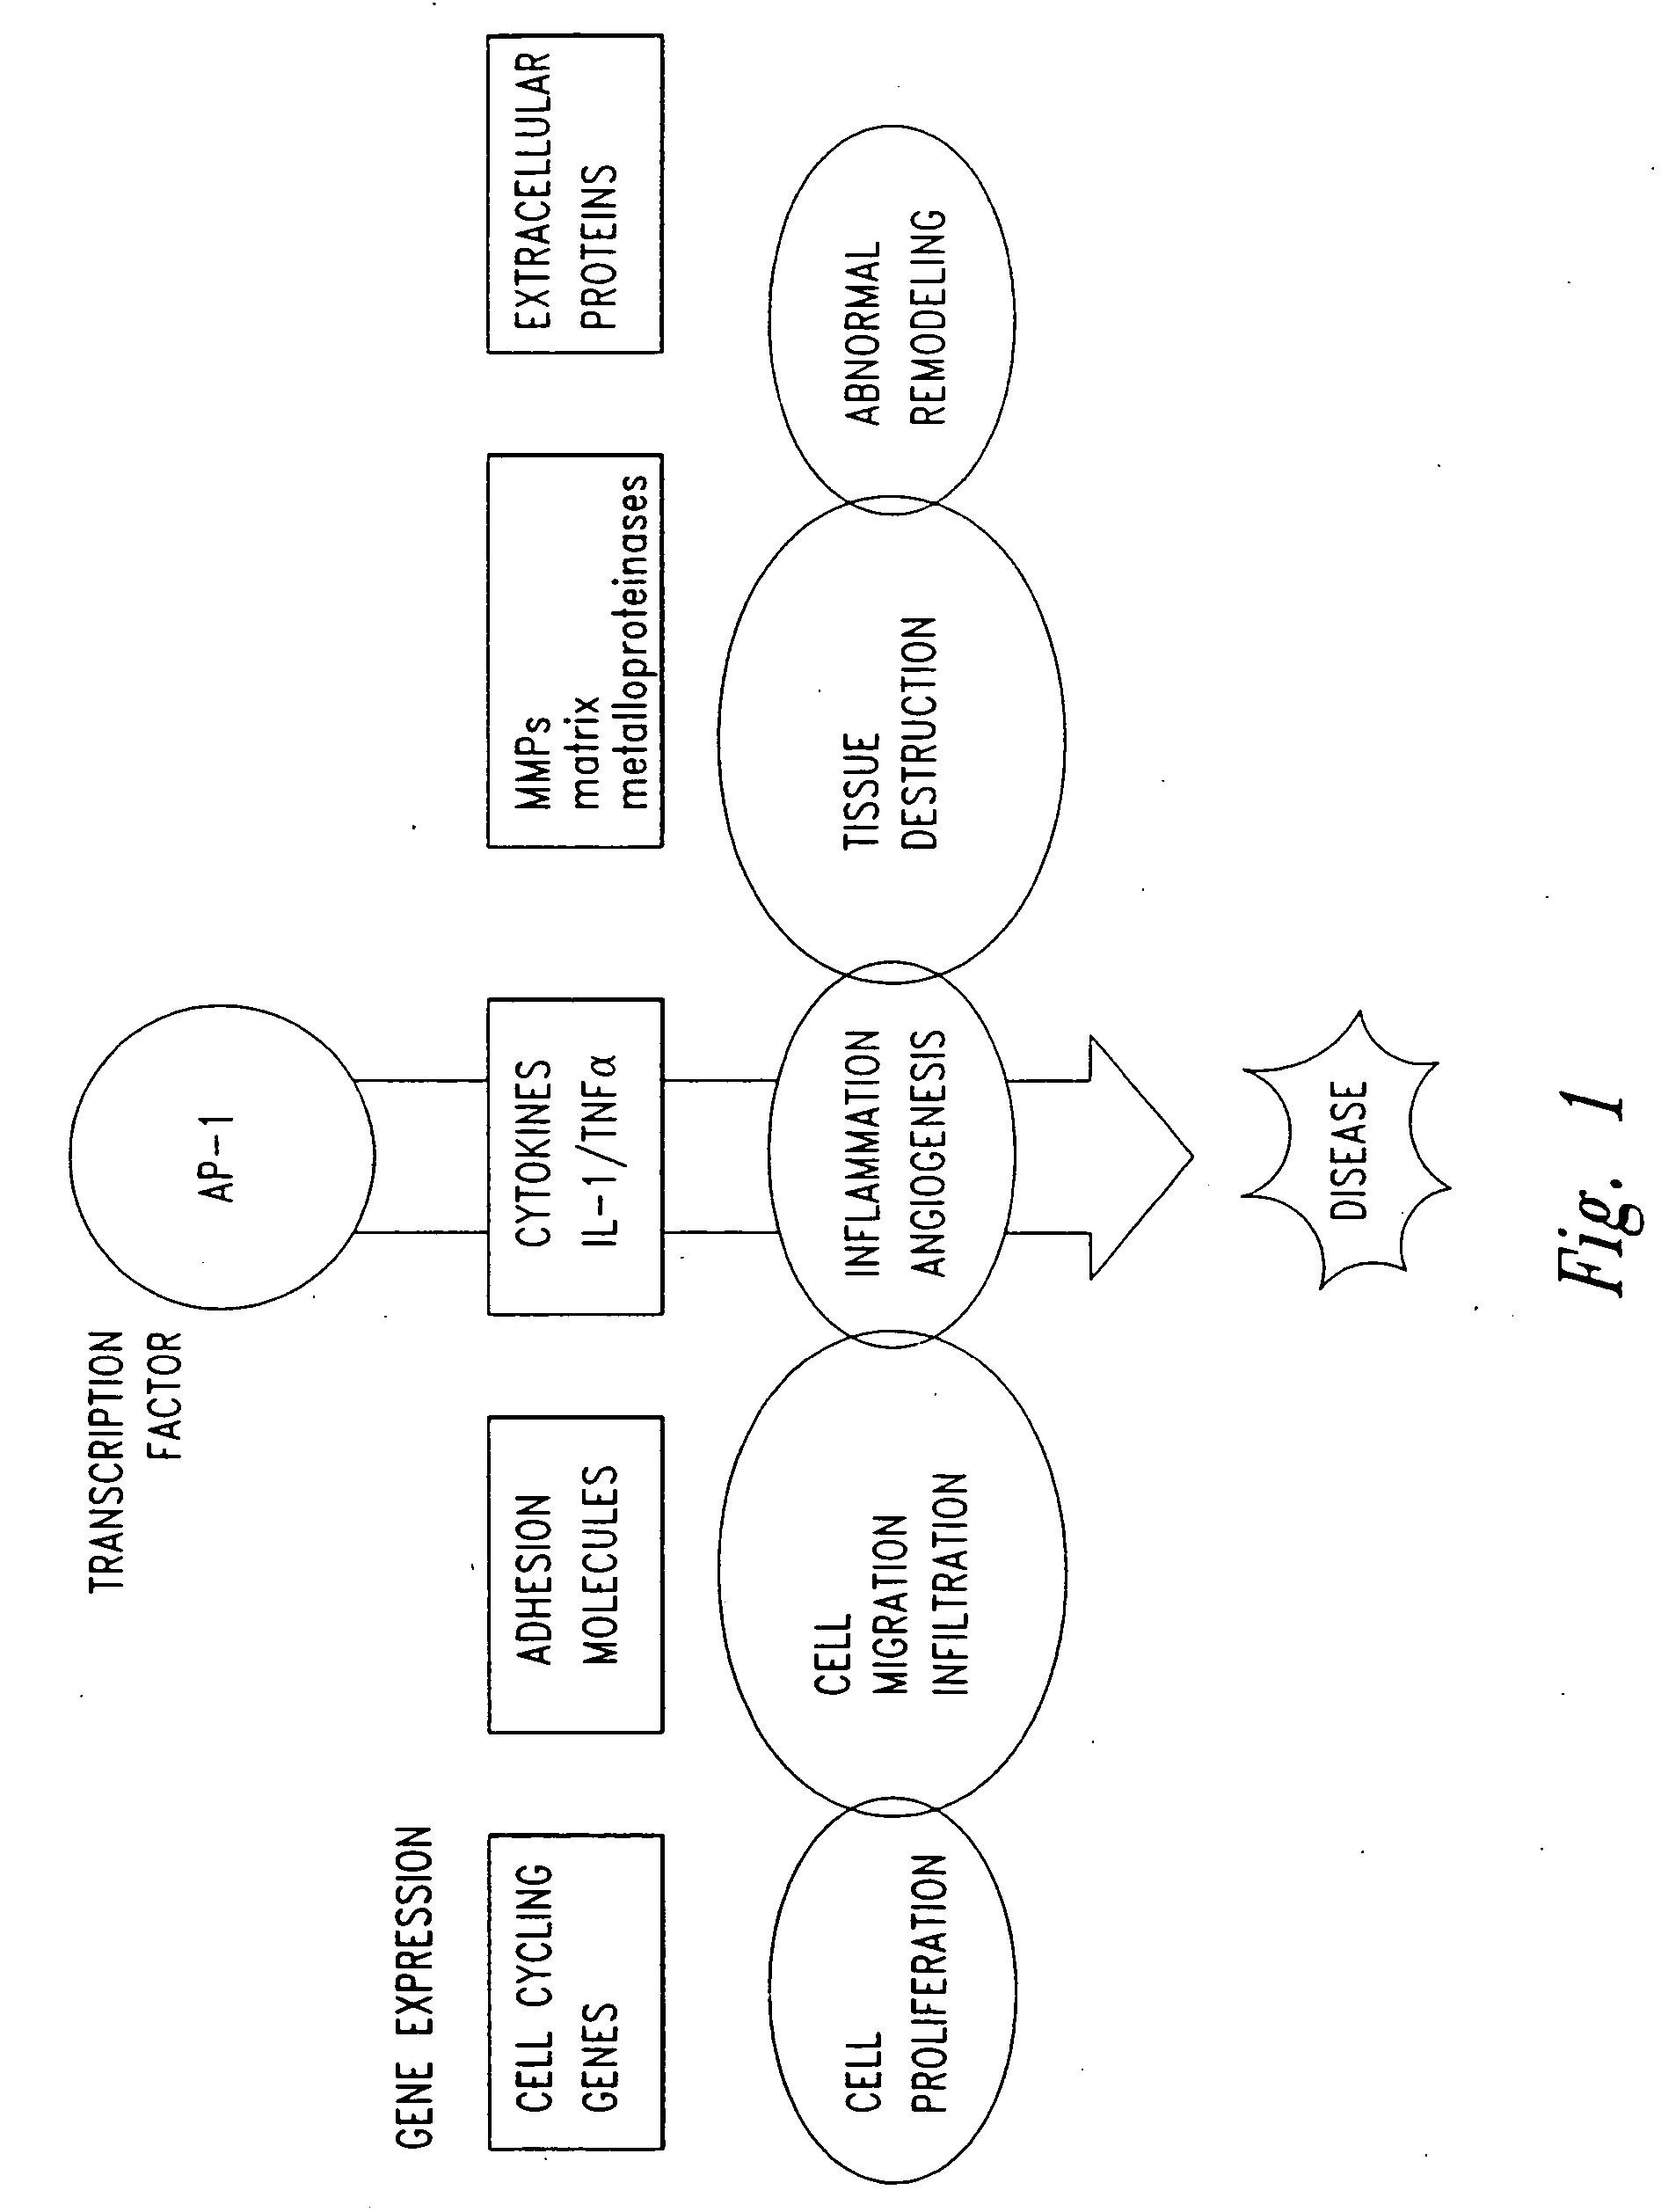 Compositions and methods for treating cellular response to injury and other proliferating cell disorders regulated by hyaladherin and hyalurons